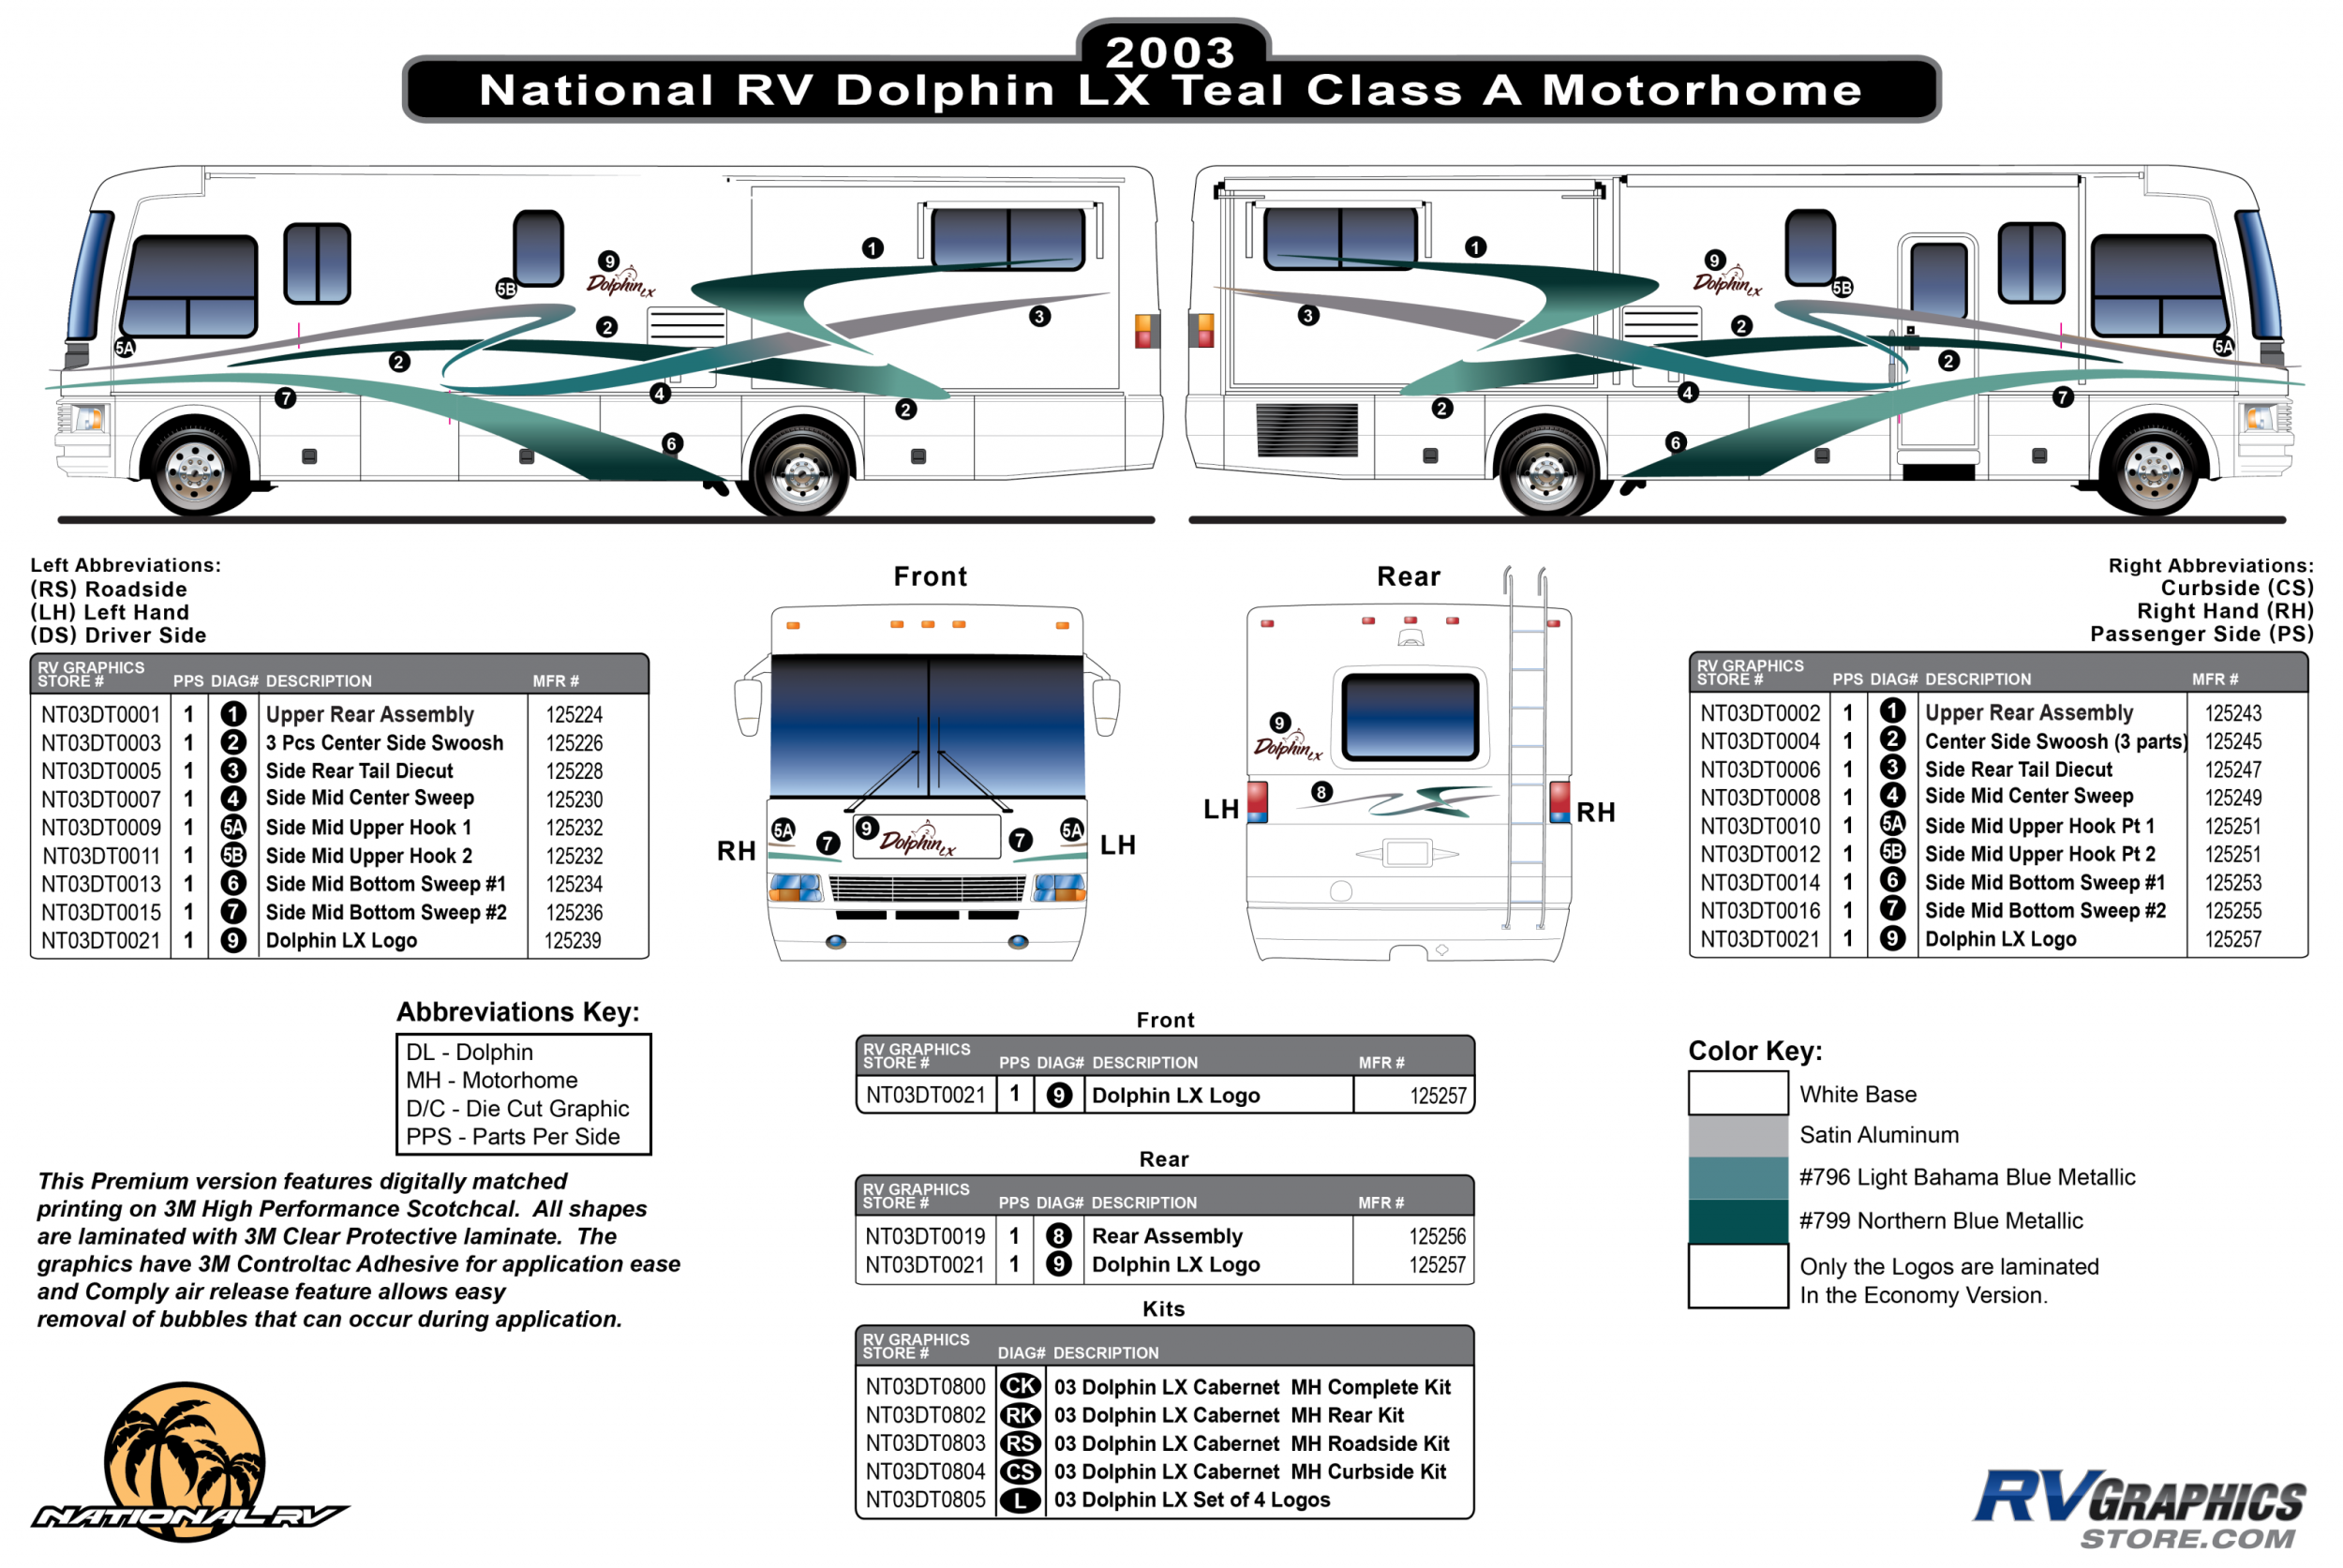 Dolphin - 2003 Dolphin  LX Teal Version Premium Graphics